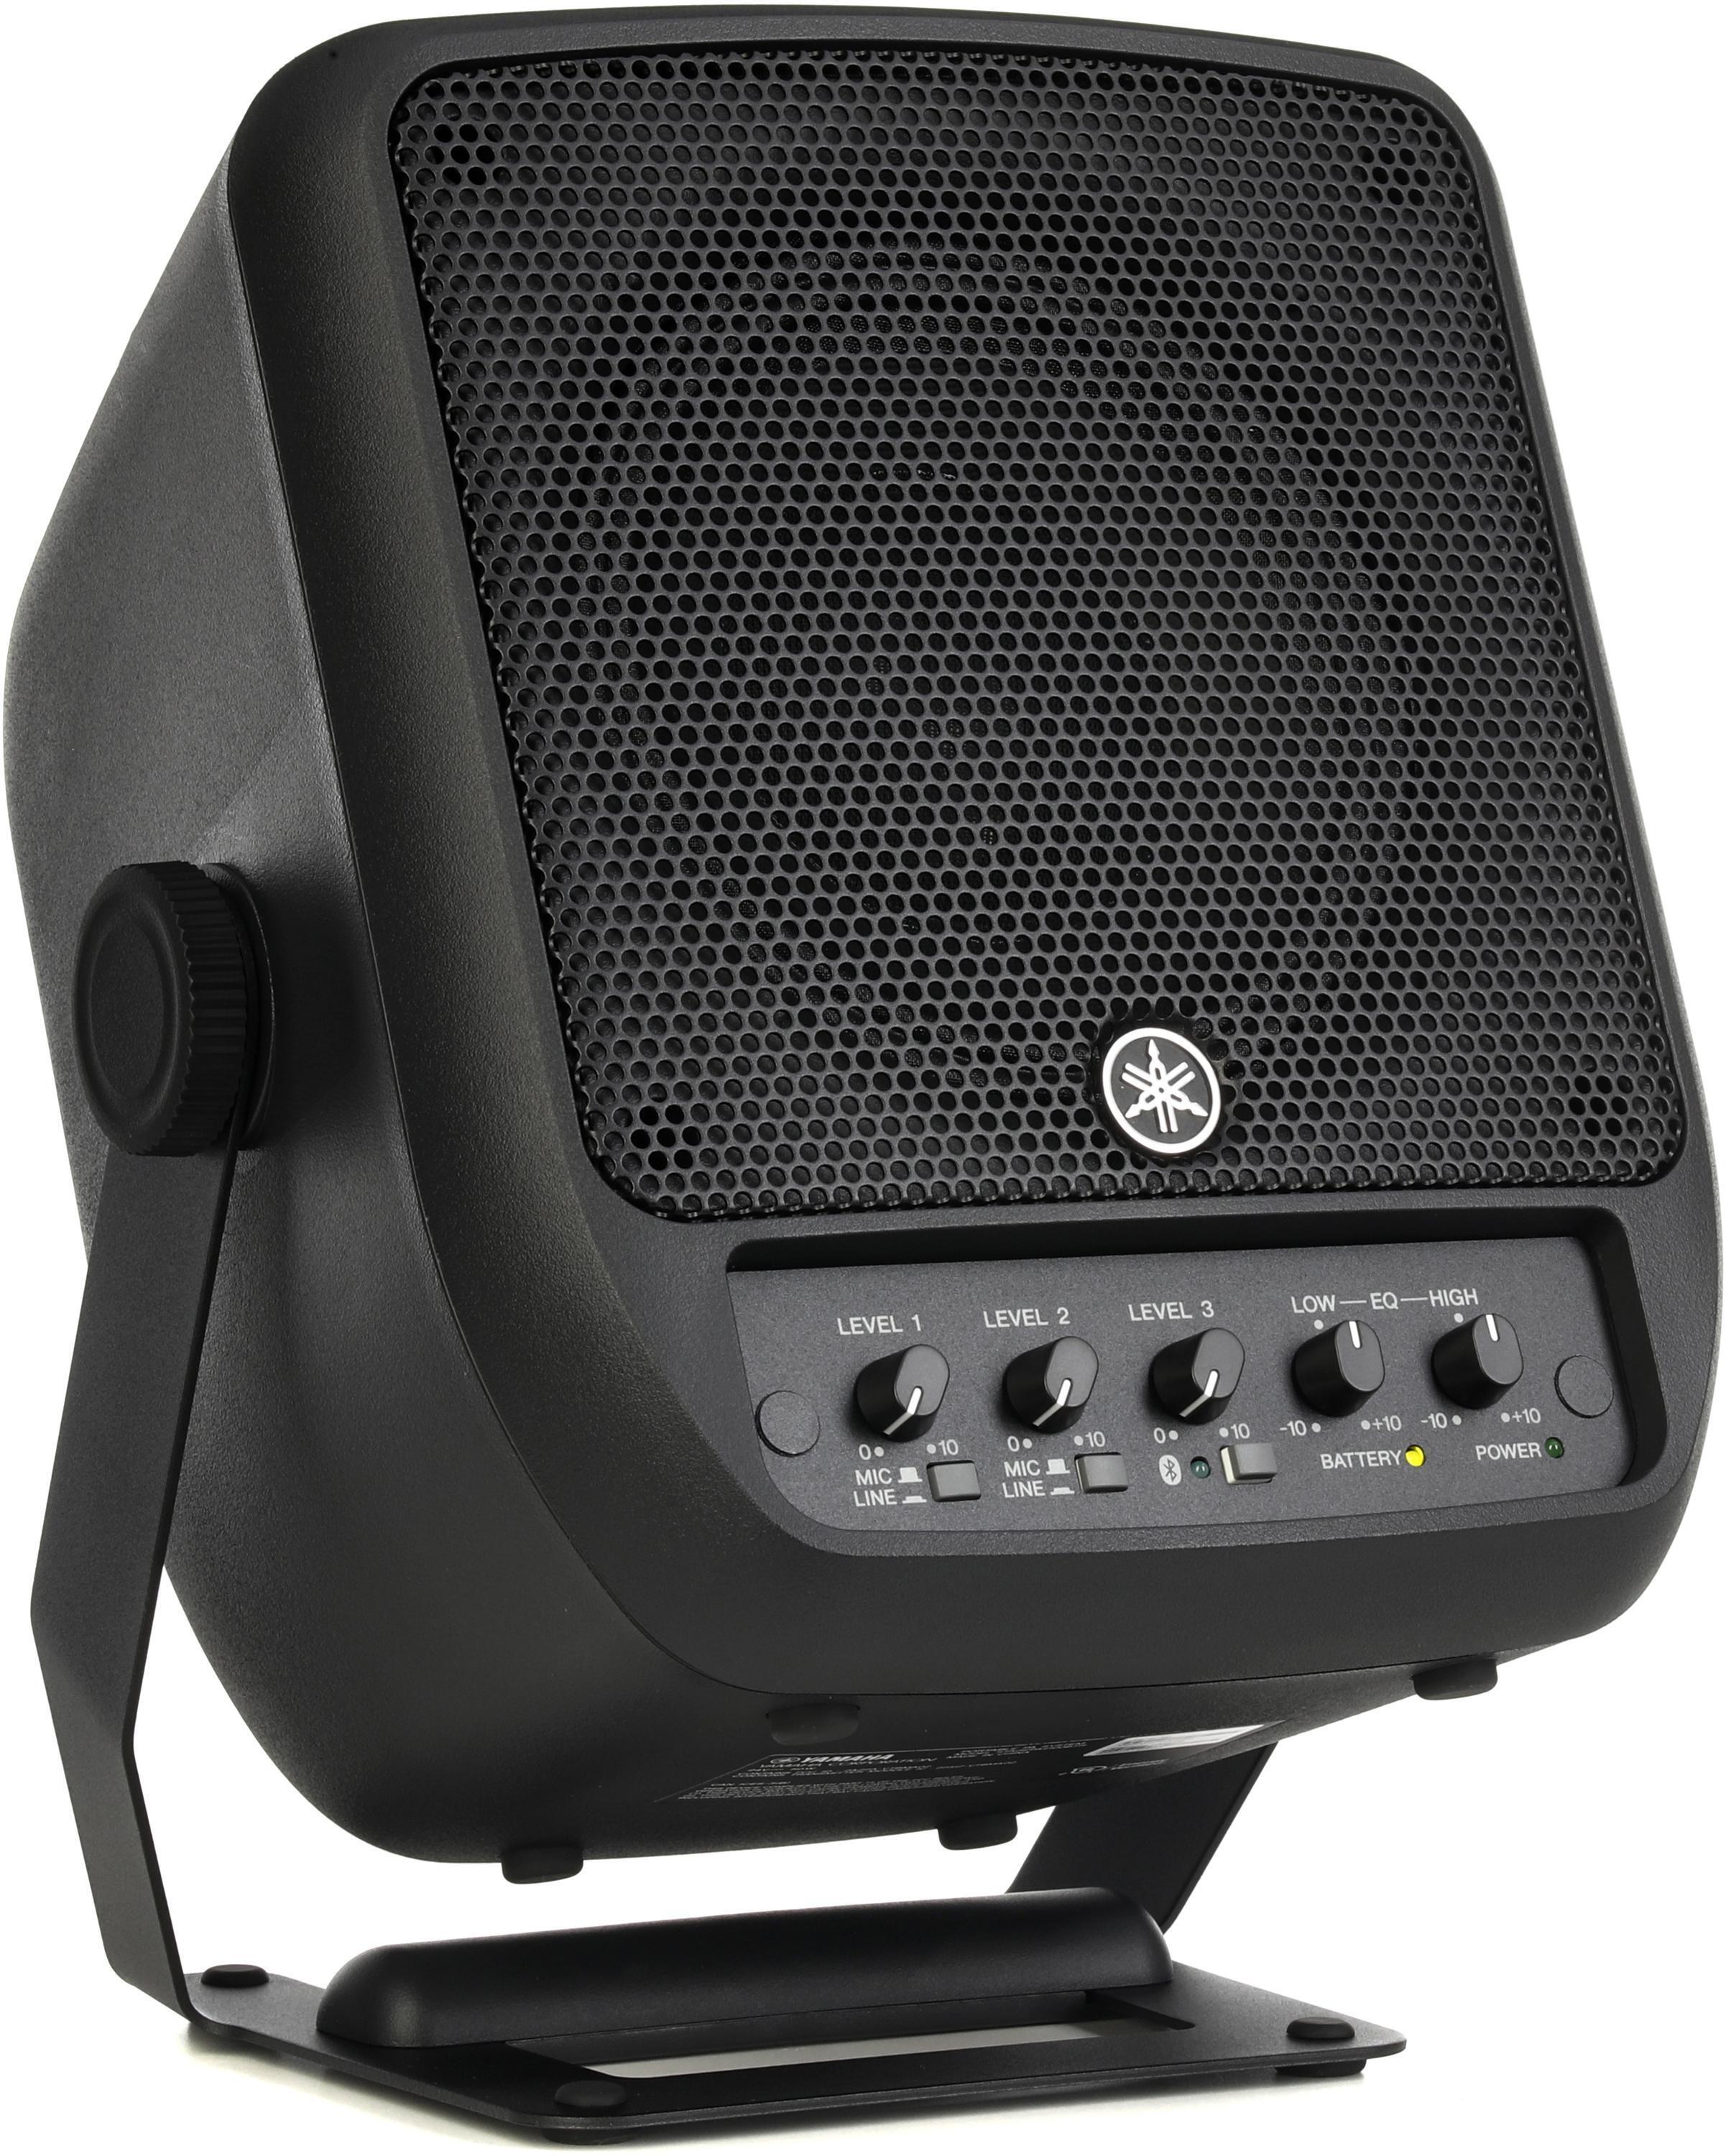 Bundled Item: Yamaha STAGEPAS 100BTR Battery-powered Portable PA System with Bluetooth